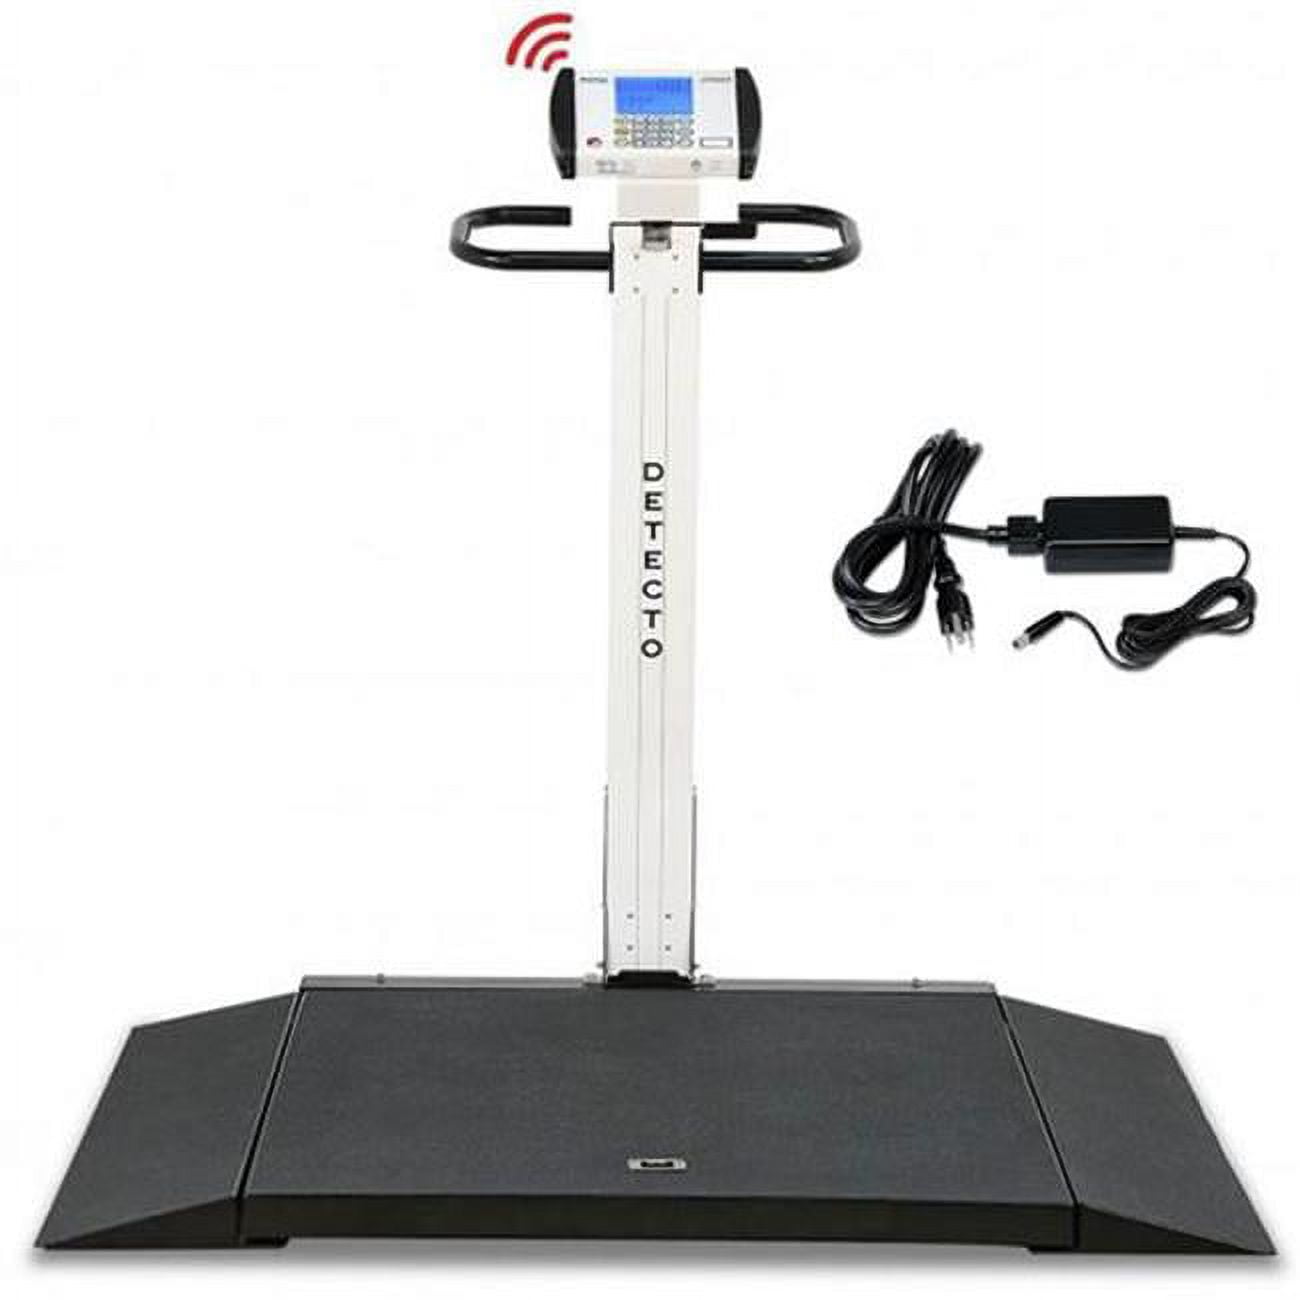 Picture of Cardinal & Detecto 6550-AC 1000 x 0.2 lbs x 0.1 kg AC Adapter Portable Digital Folding Column Wheelchair Scale